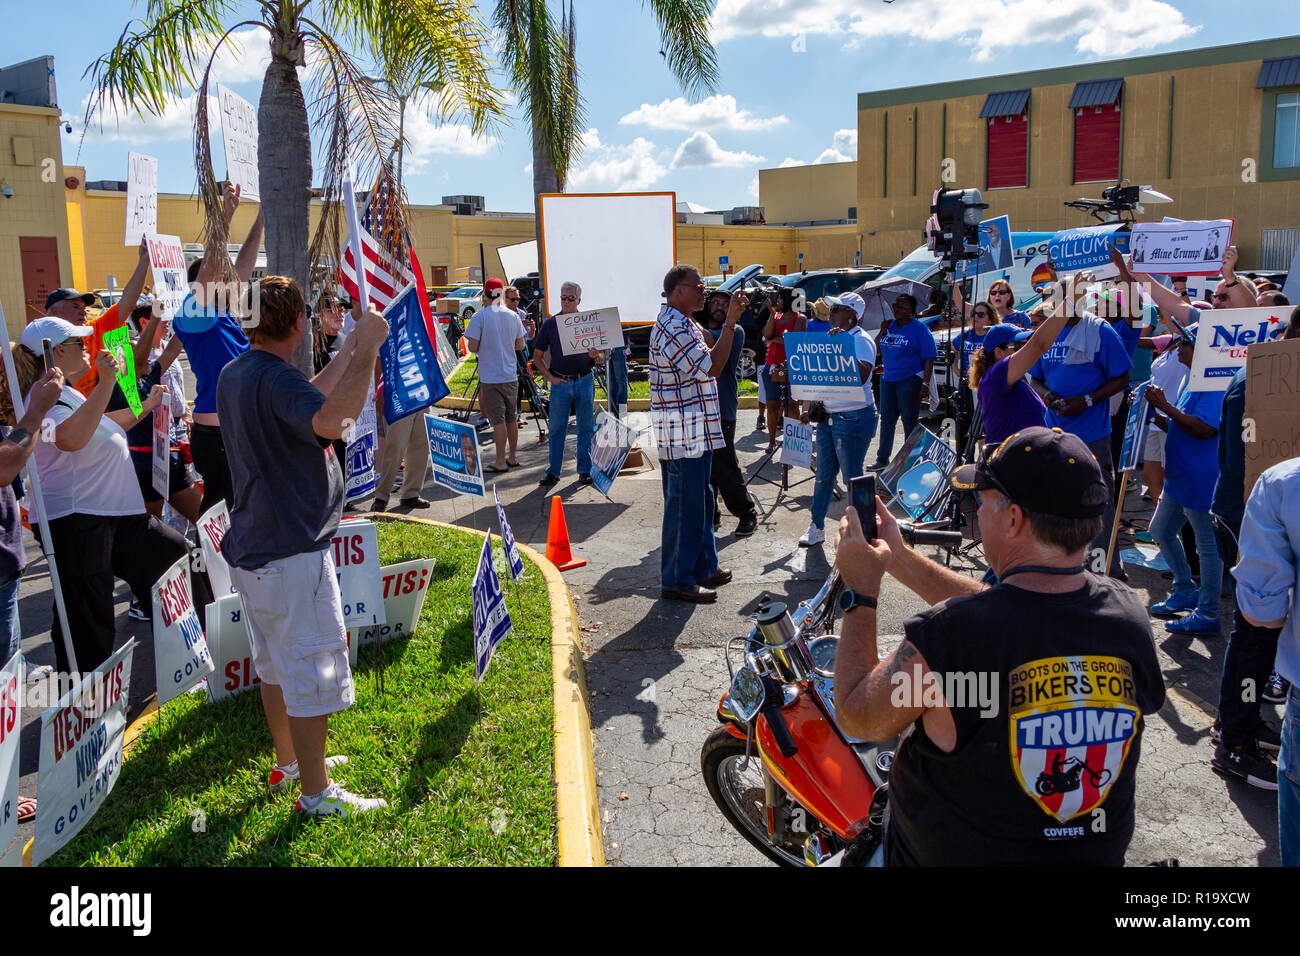 Lauderhill, Florida, USA. 10th Nov, 2018. Republicans and Democrats face off at vote counting protest outside Broward County Supervisor of Elections Brenda Snipes' office. The protest began over controversy surrounding the results of the 2018 midterm elections for Florida Governor and Florida Senator. Holly Guerrio/Alamy Live News Stock Photo